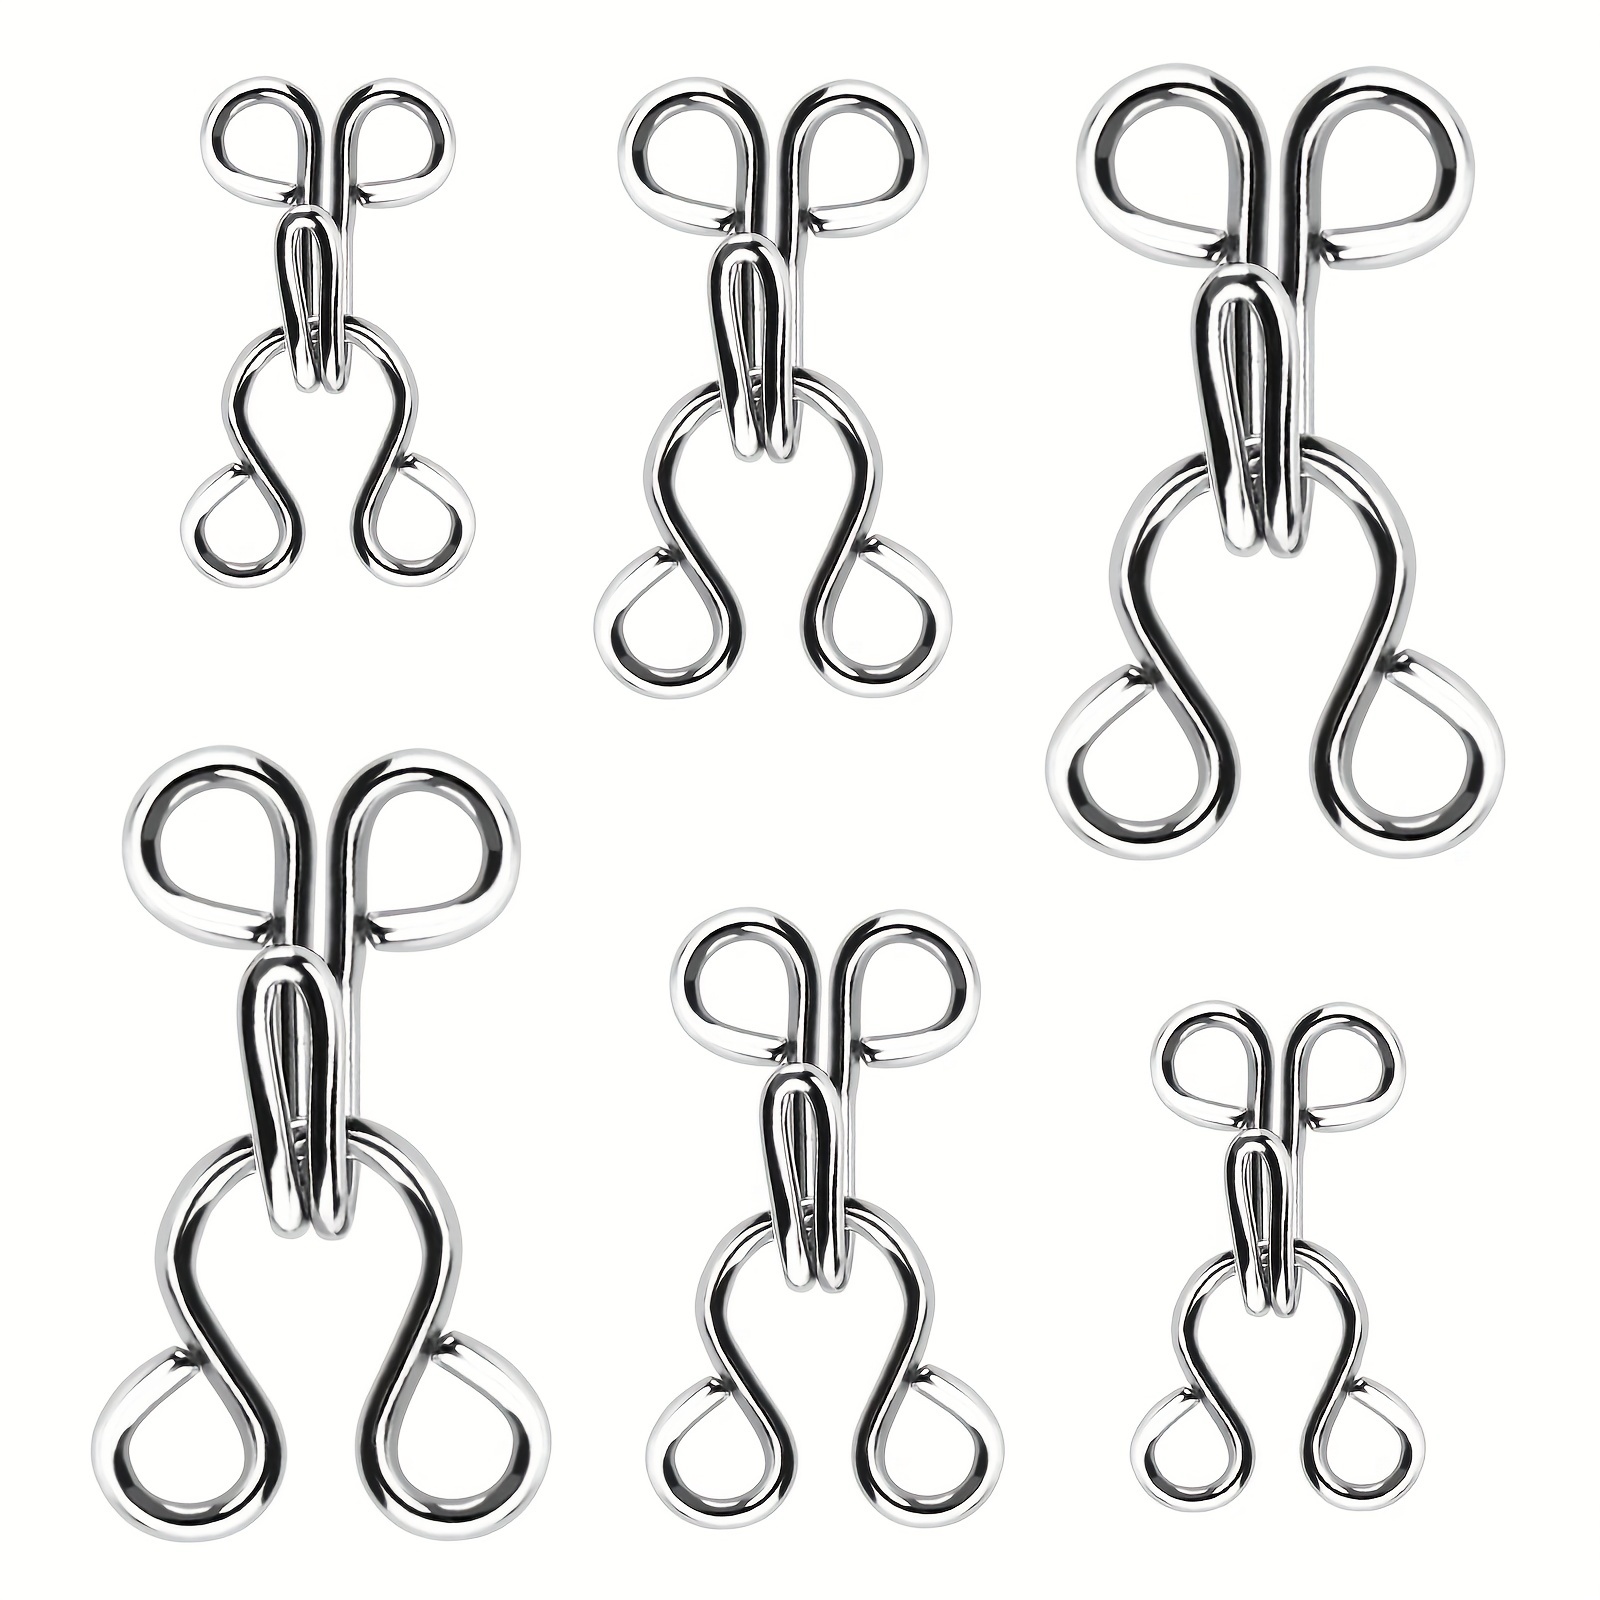 102 Set Hook and Eye Latch for Clothing, Strong Metal Bra Hooks Eyes